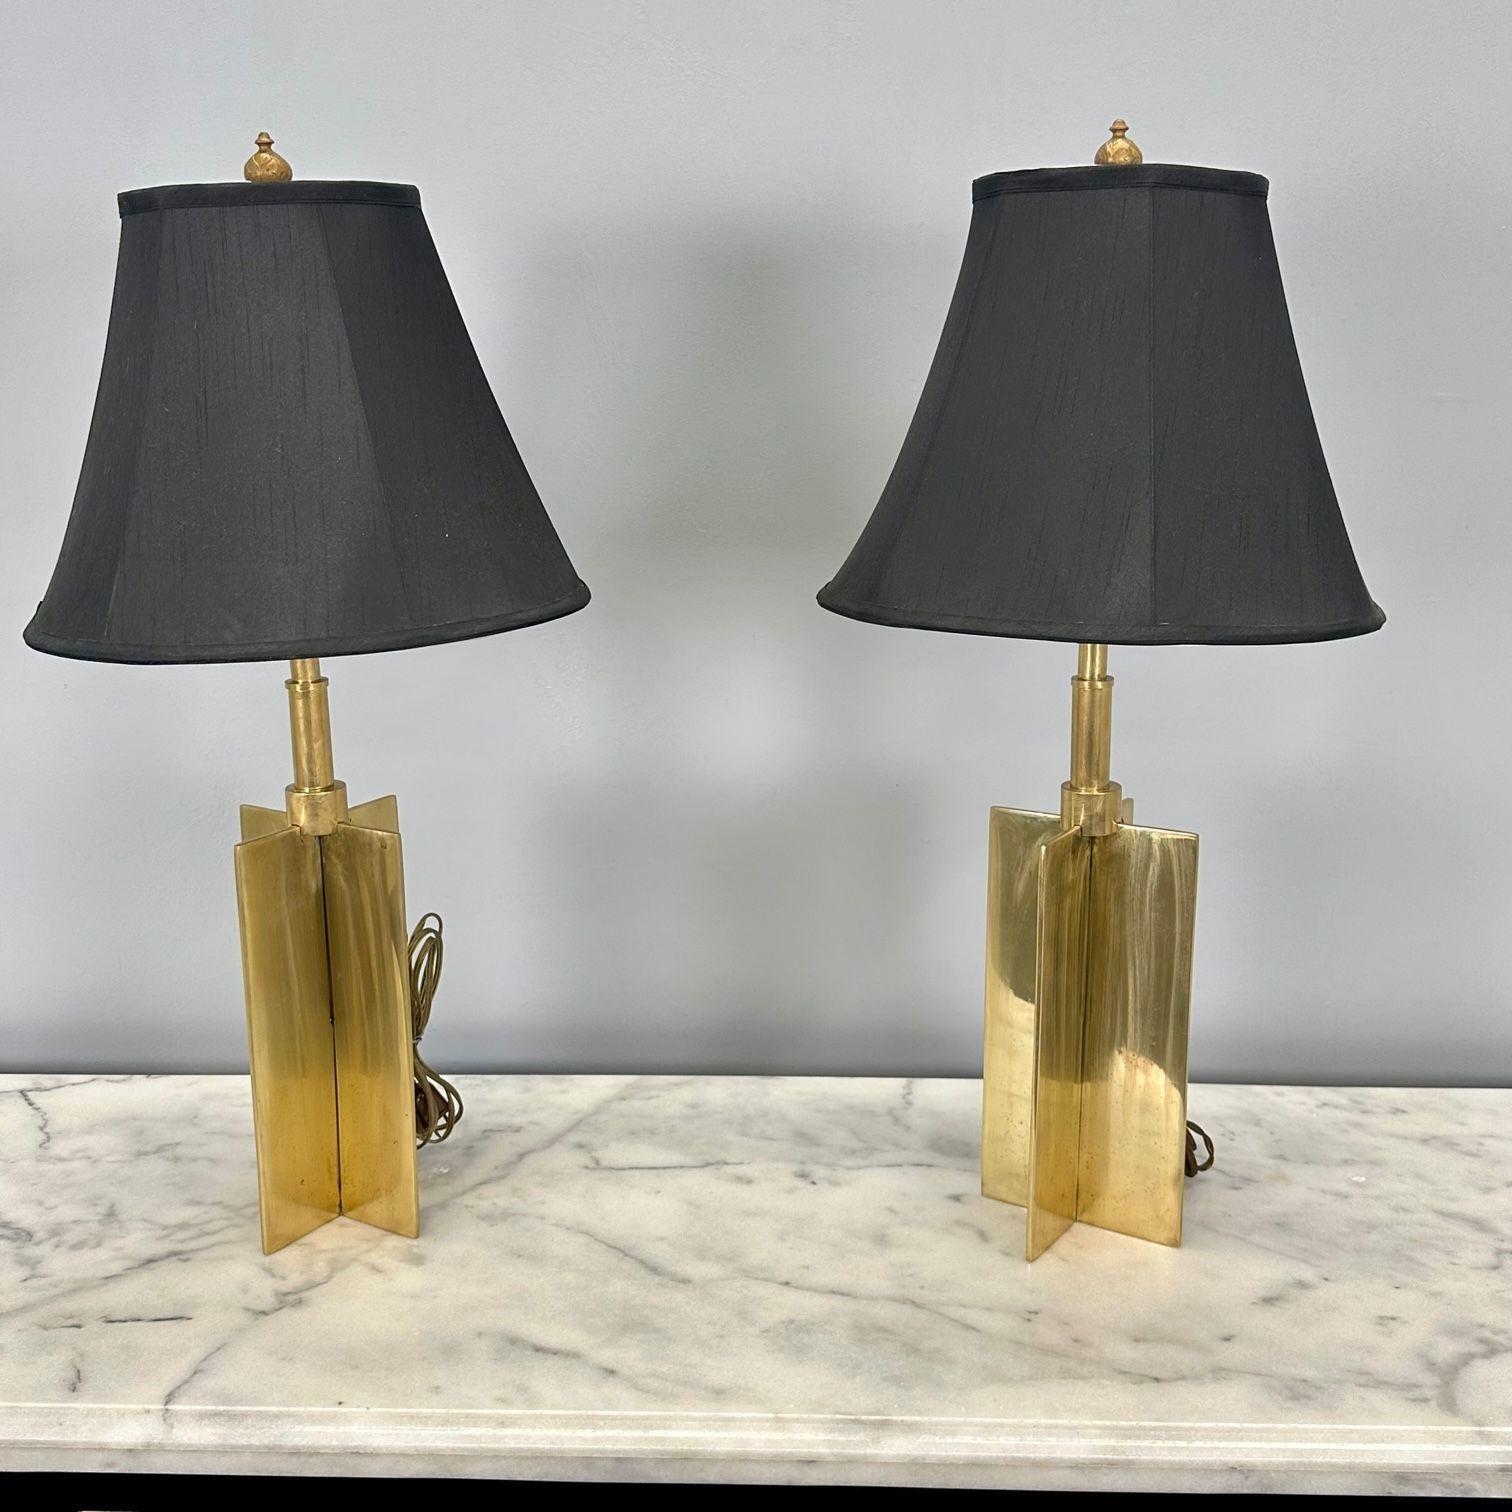 Mid-Century Modern Jean Michel Frank Style Solid Bronze Table / Desk Lamps
 
Pair of custom Croisillion lamps in The Jean Michel Frank Manner. These solid bronze X-form table lamps are simply stunning. The sleek and simplistic form reminiscent of